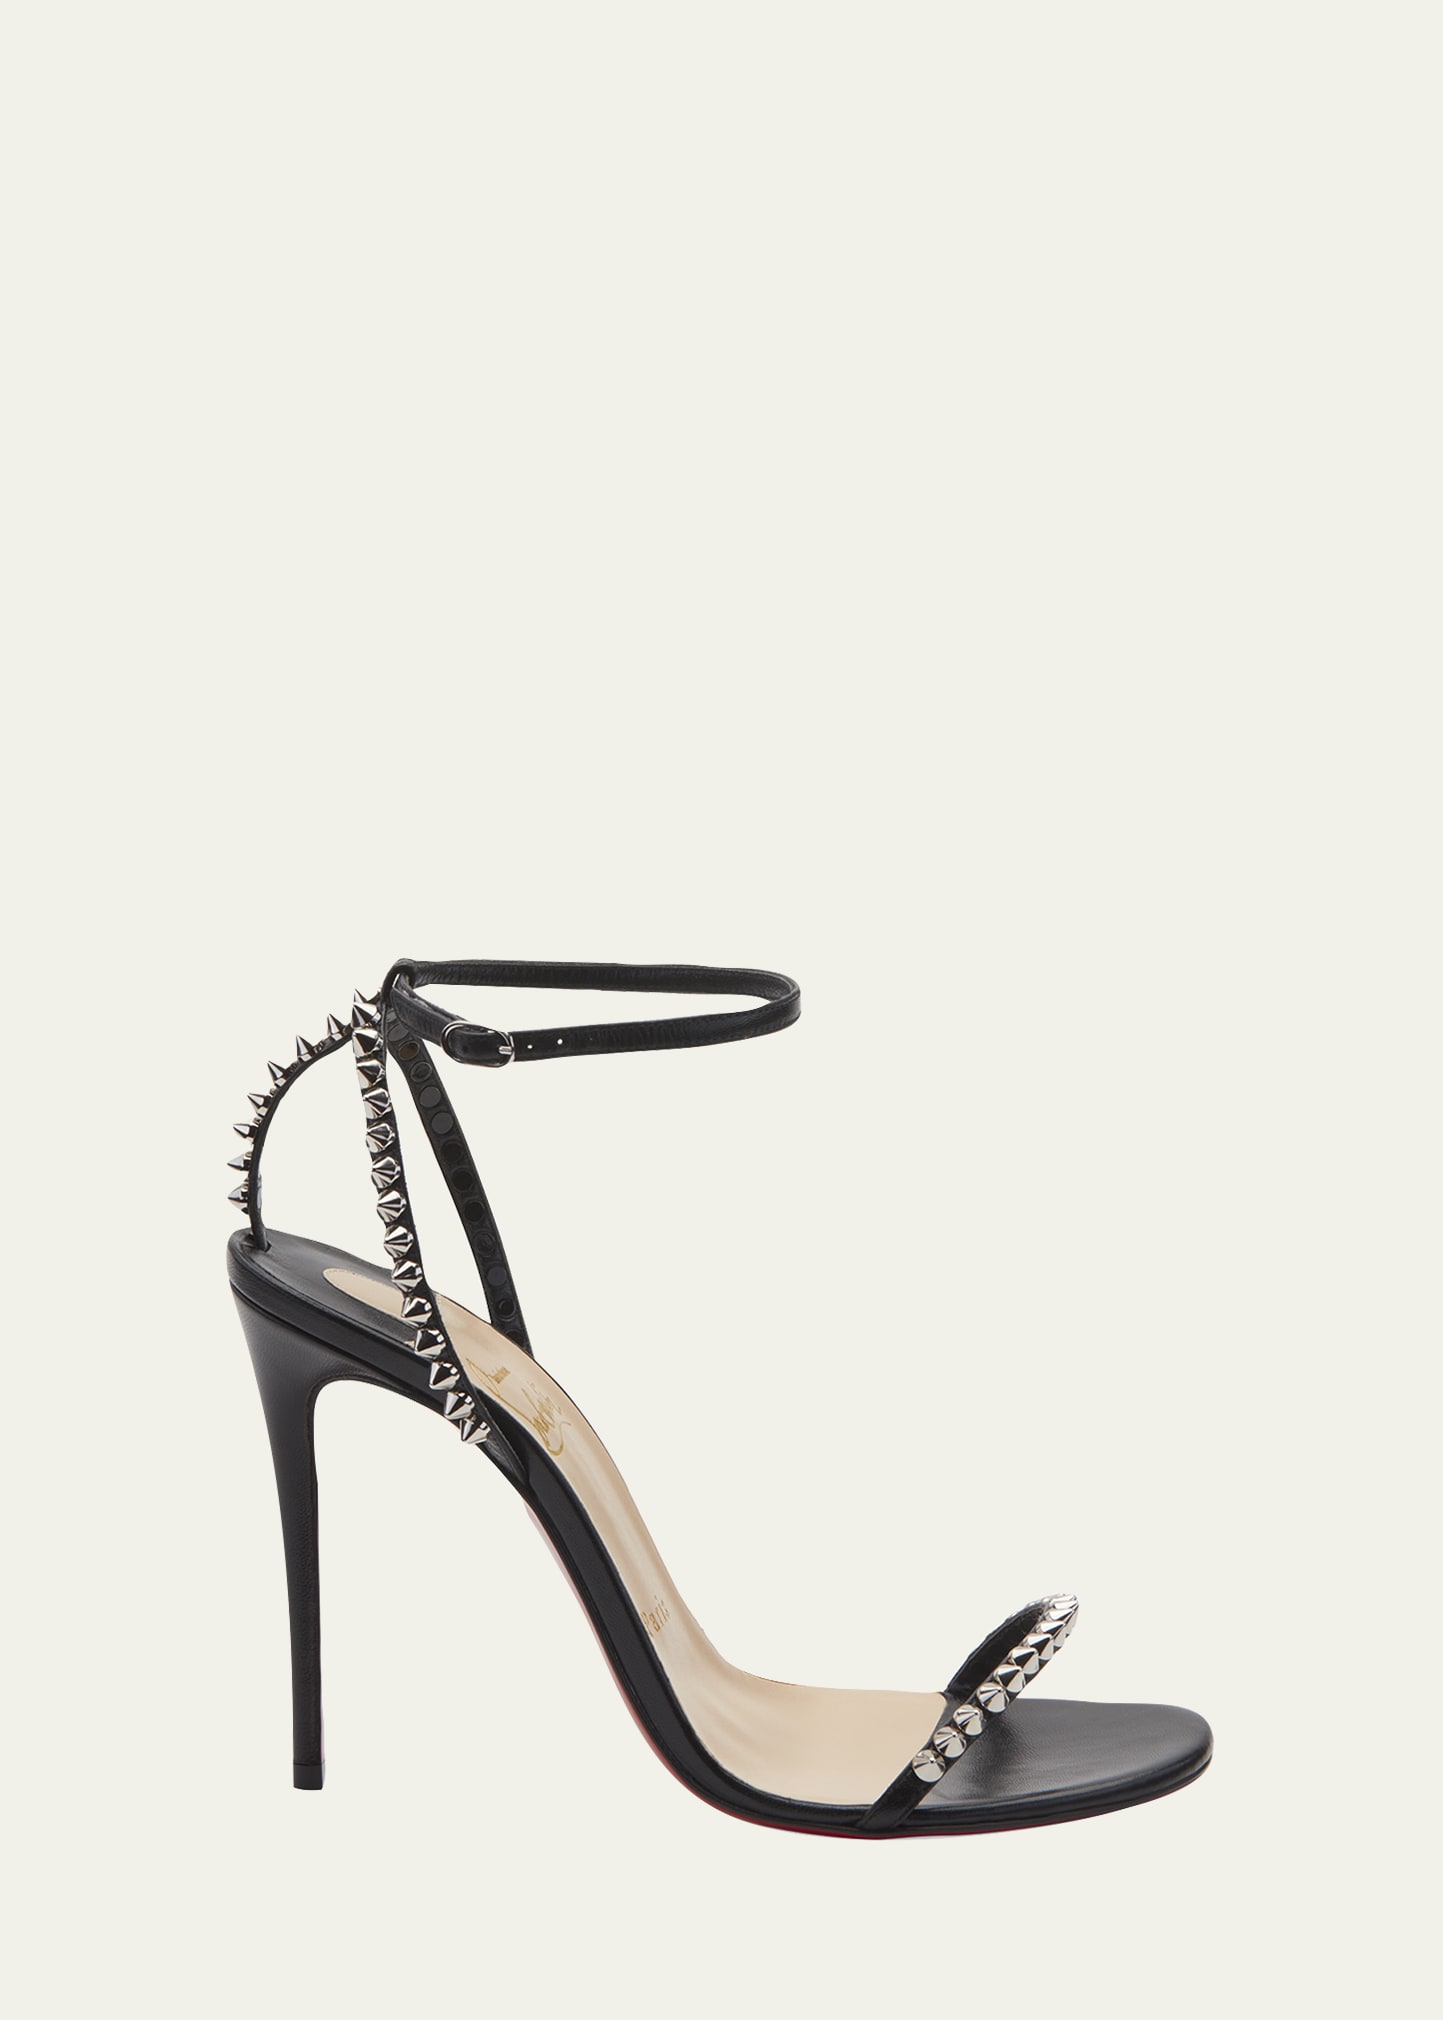 Christian Louboutin So Me Red Sole Sandals - Bergdorf Goodman